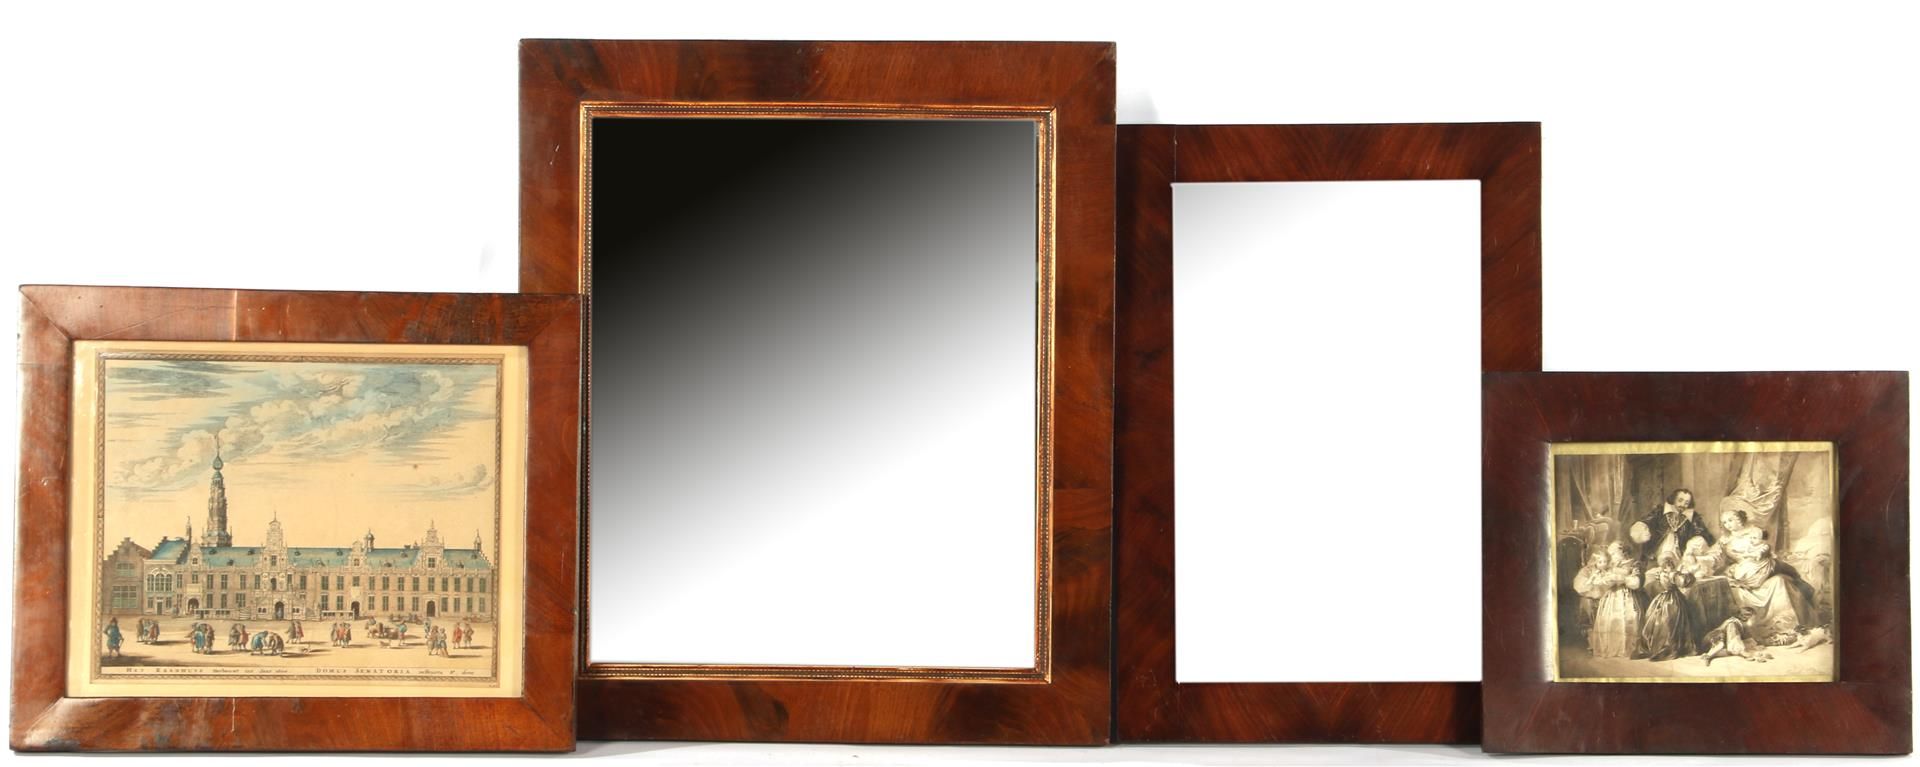 2 19th century mirrors in mahogany veneer frames, 56x48 cm and 50x34 cm, color lithograph by the